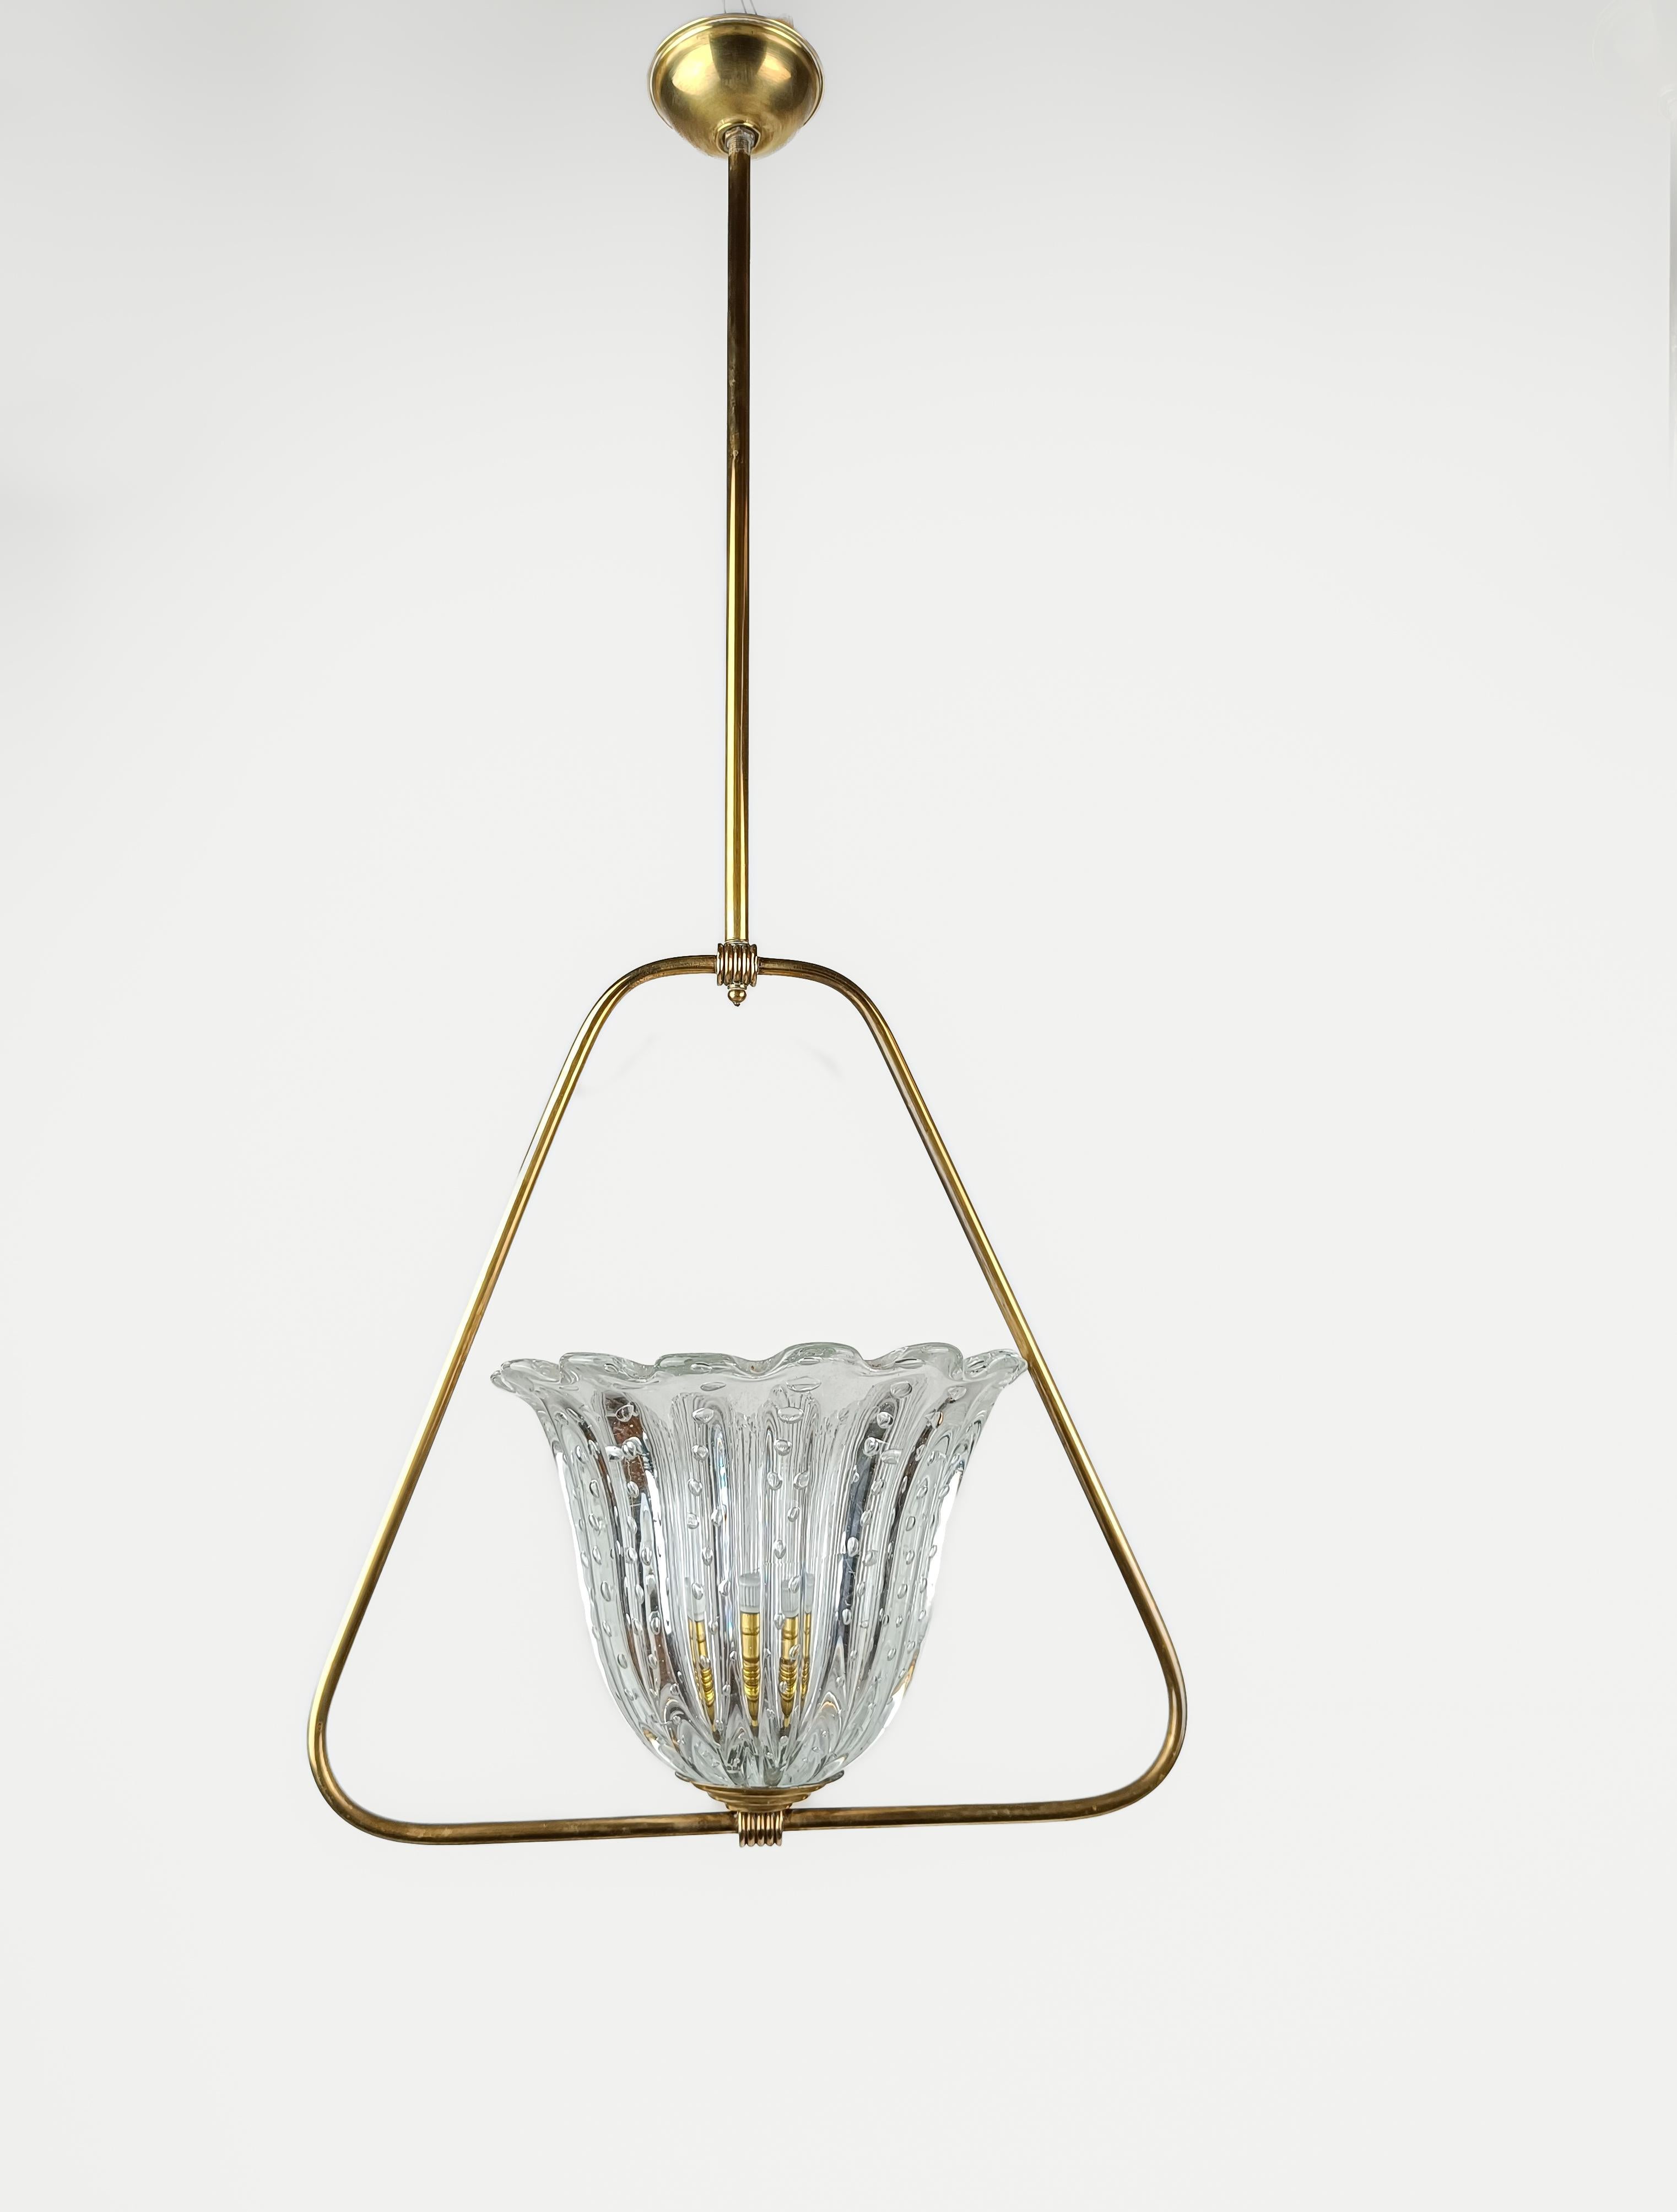 
Essential and Elegant, this chandelier made up of a few elements was produced by skilled craftsmen in Italy between the 1930s and 1940s.
The structure is in brass rod, composed of two bodies joined together by two small decorations.
The lower body,